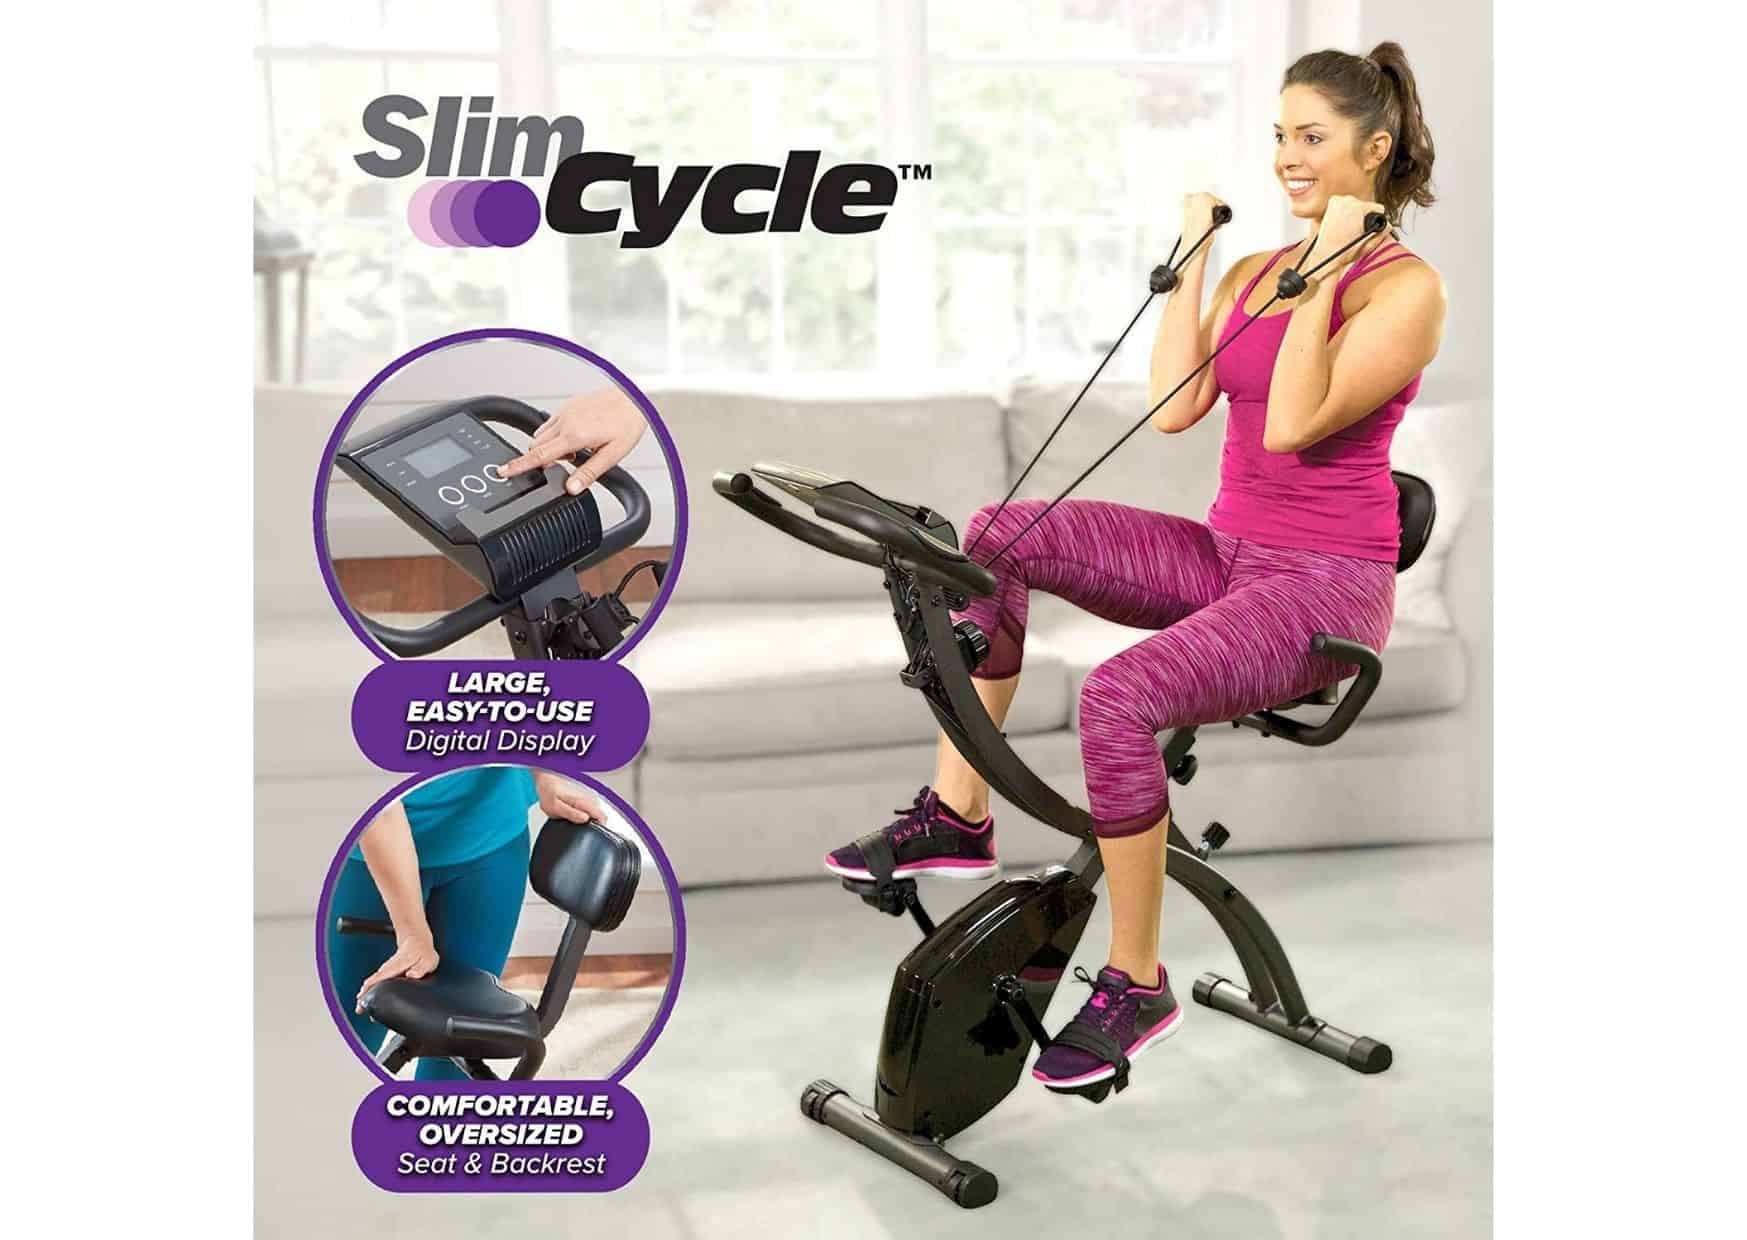 10 Best Exercise Bikes for Your Home Gym